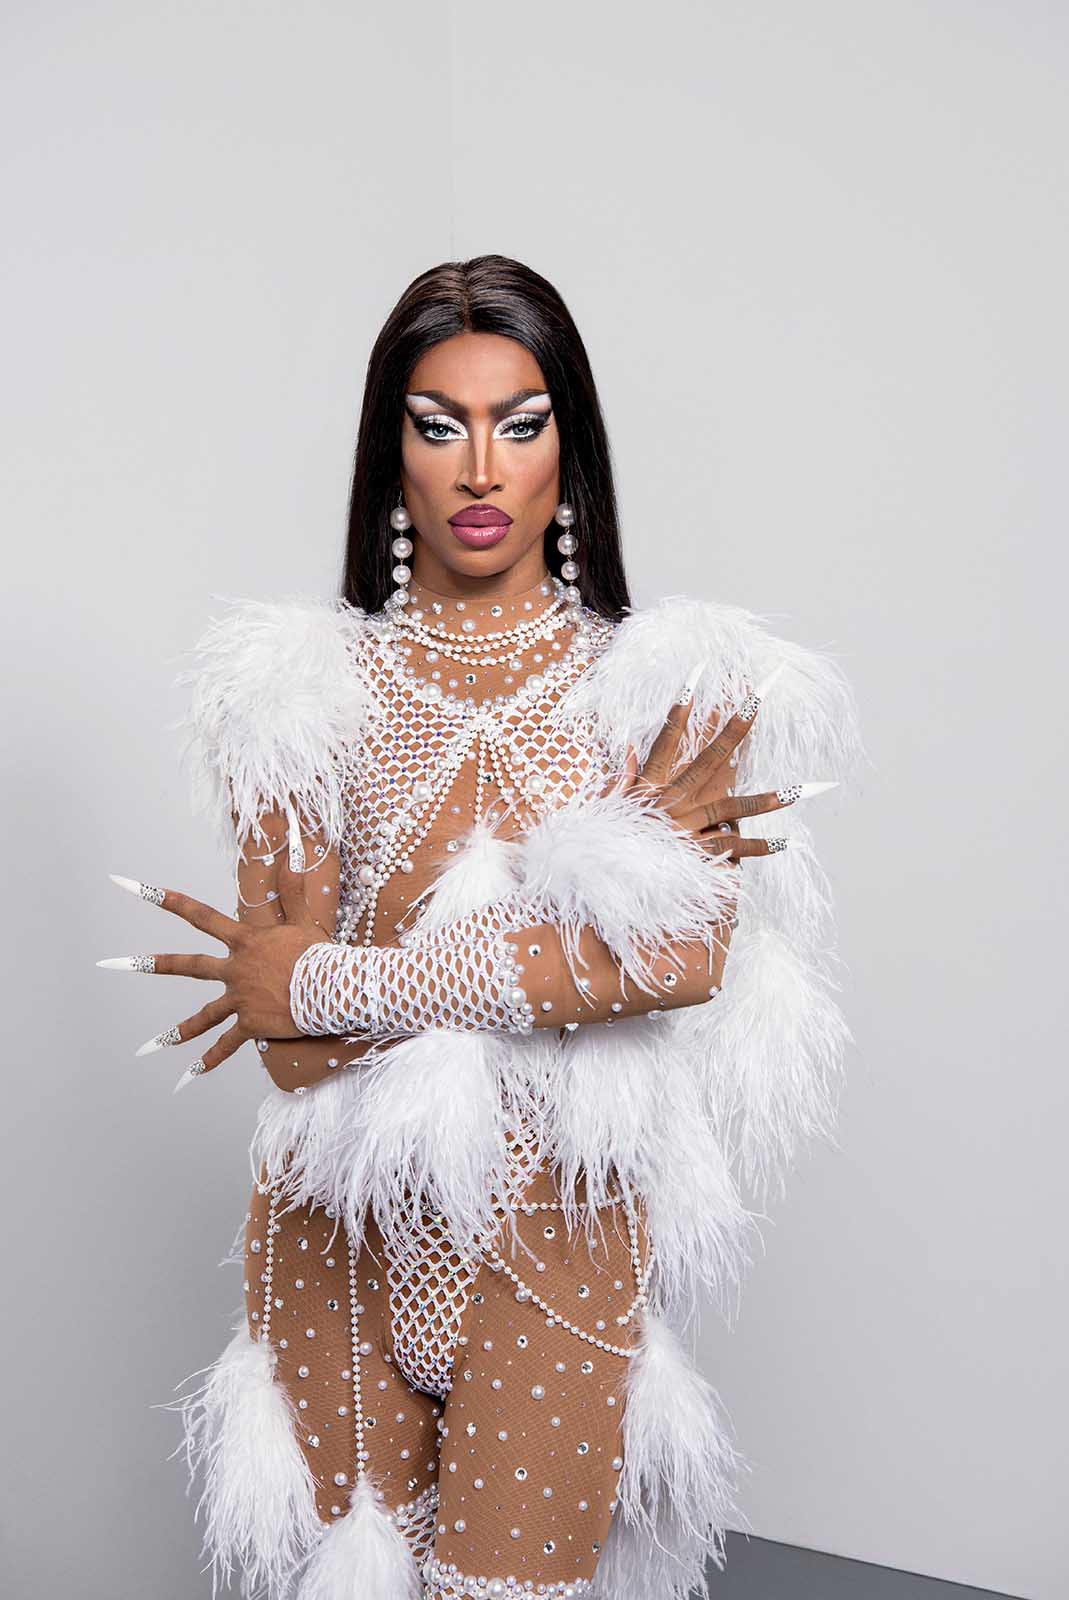 The tea is hot on this season of 'RuPaul's Drag Race UK', and it's only getting hotter. Catch up with the spiciest reads from the first two episodes. 